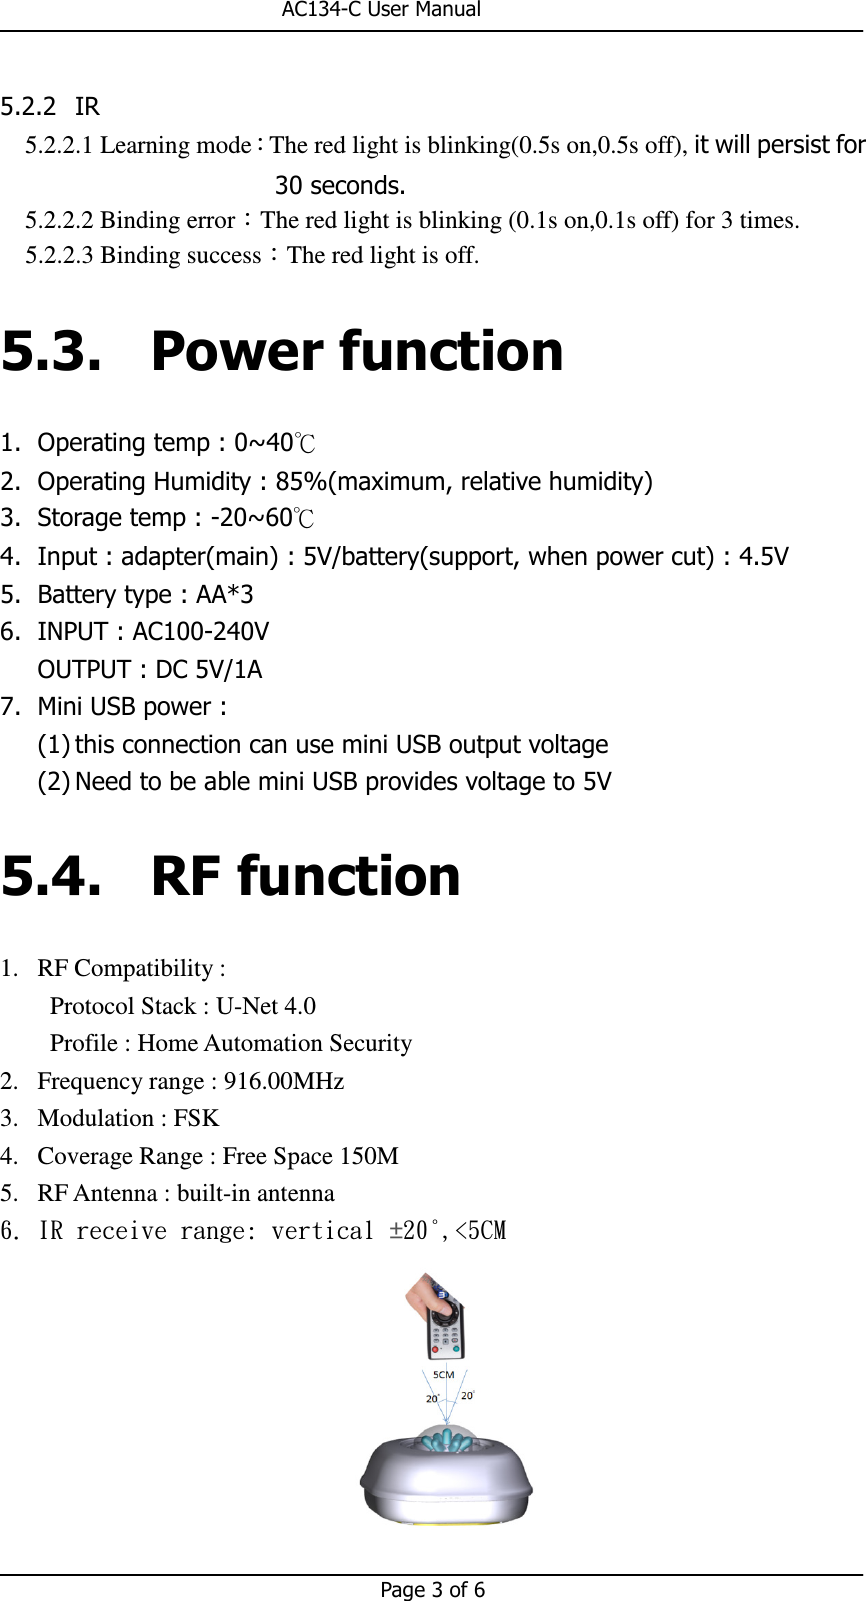                                                       AC134-C User Manual   Page 3 of 6  5.2.2 IR 5.2.2.1 Learning mode：The red light is blinking(0.5s on,0.5s off), it will persist for 30 seconds. 5.2.2.2 Binding error：The red light is blinking (0.1s on,0.1s off) for 3 times. 5.2.2.3 Binding success：The red light is off. 5.3. Power function 1. Operating temp : 0~40℃ 2. Operating Humidity : 85%(maximum, relative humidity) 3. Storage temp : -20~60℃ 4. Input : adapter(main) : 5V/battery(support, when power cut) : 4.5V 5. Battery type : AA*3 6. INPUT : AC100-240V OUTPUT : DC 5V/1A 7. Mini USB power :   (1) this connection can use mini USB output voltage (2) Need to be able mini USB provides voltage to 5V 5.4. RF function 1. RF Compatibility :   Protocol Stack : U-Net 4.0 Profile : Home Automation Security 2. Frequency range : 916.00MHz 3. Modulation : FSK 4. Coverage Range : Free Space 150M 5. RF Antenna : built-in antenna 6. IR receive range: vertical ±20°,&lt;5CM  